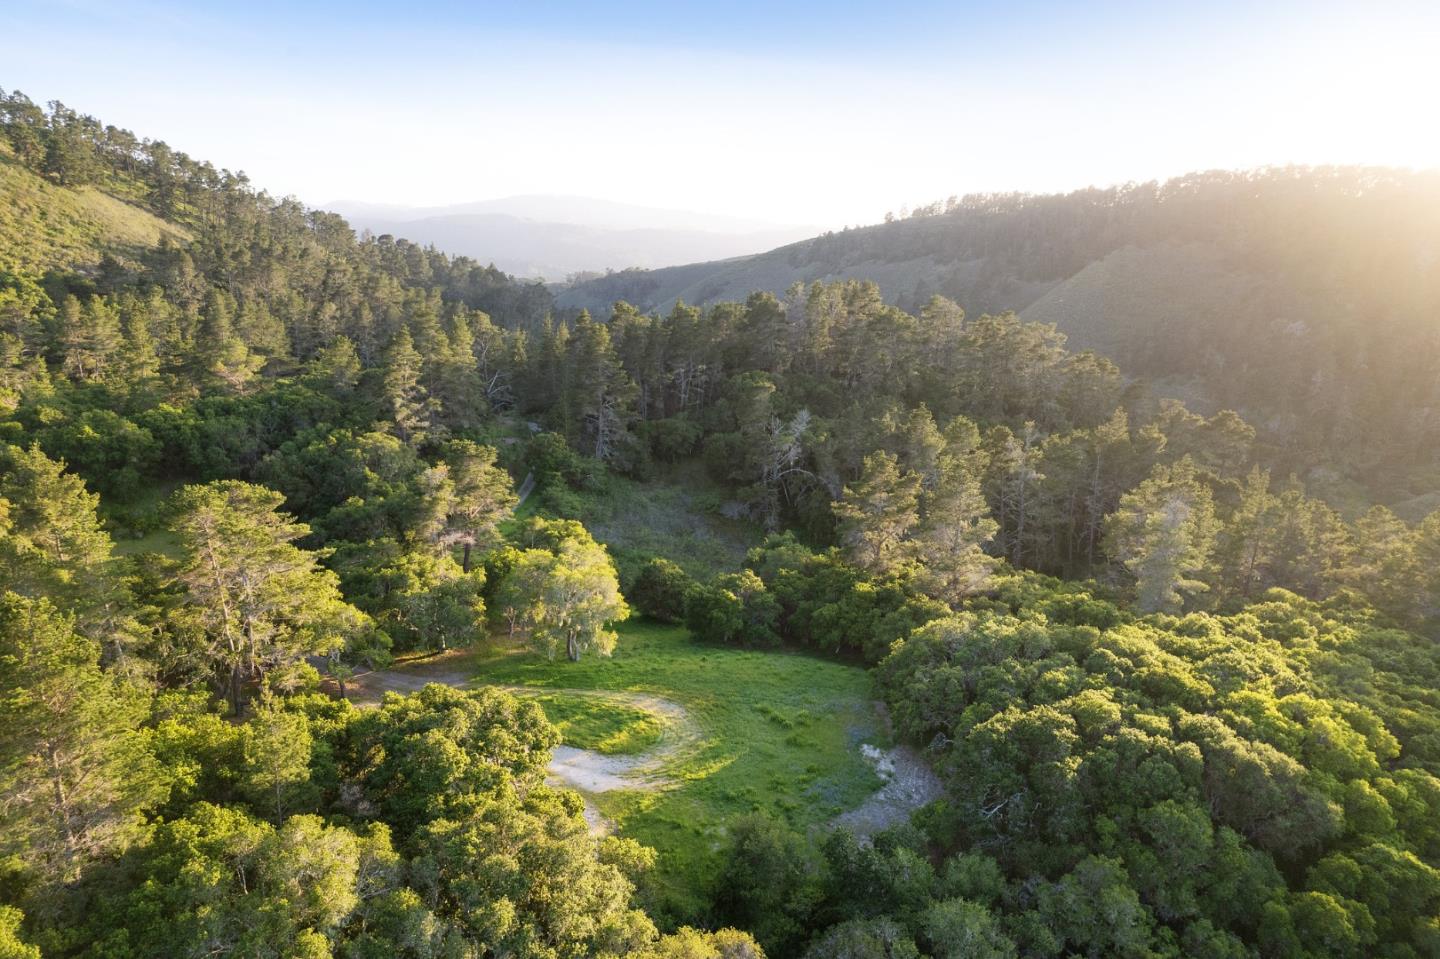 This exceptionally private 13.16-acre homesite located in the coveted Teháma community envisioned by Clint Eastwood is coming to market for the first time and features an expansive 1.04-acre building envelope immersed in natural light and surrounded by an otherworldly forest. Cloistered on its own cul-de-sac, The Sanctuary impresses with an entrance through a wooded landscape reminiscent of entering a National Park. While mostly level, the building envelope also slopes up the hillside, affording discretion for crafting an architecturally distinctive home that incorporates the natural elevation into its design. Be among the few to reside in an exclusive locale marked by a thoughtful vision of sustainability. Owners enjoy Teháma social membership (subject to dues, fees & rules/regulations), including dining, fitness center, tennis and swimming pools. Located in the highly rated Carmel School District, Teháma has secure, gated entrances and is minutes from both Carmel-by-the-Sea and Monterey.